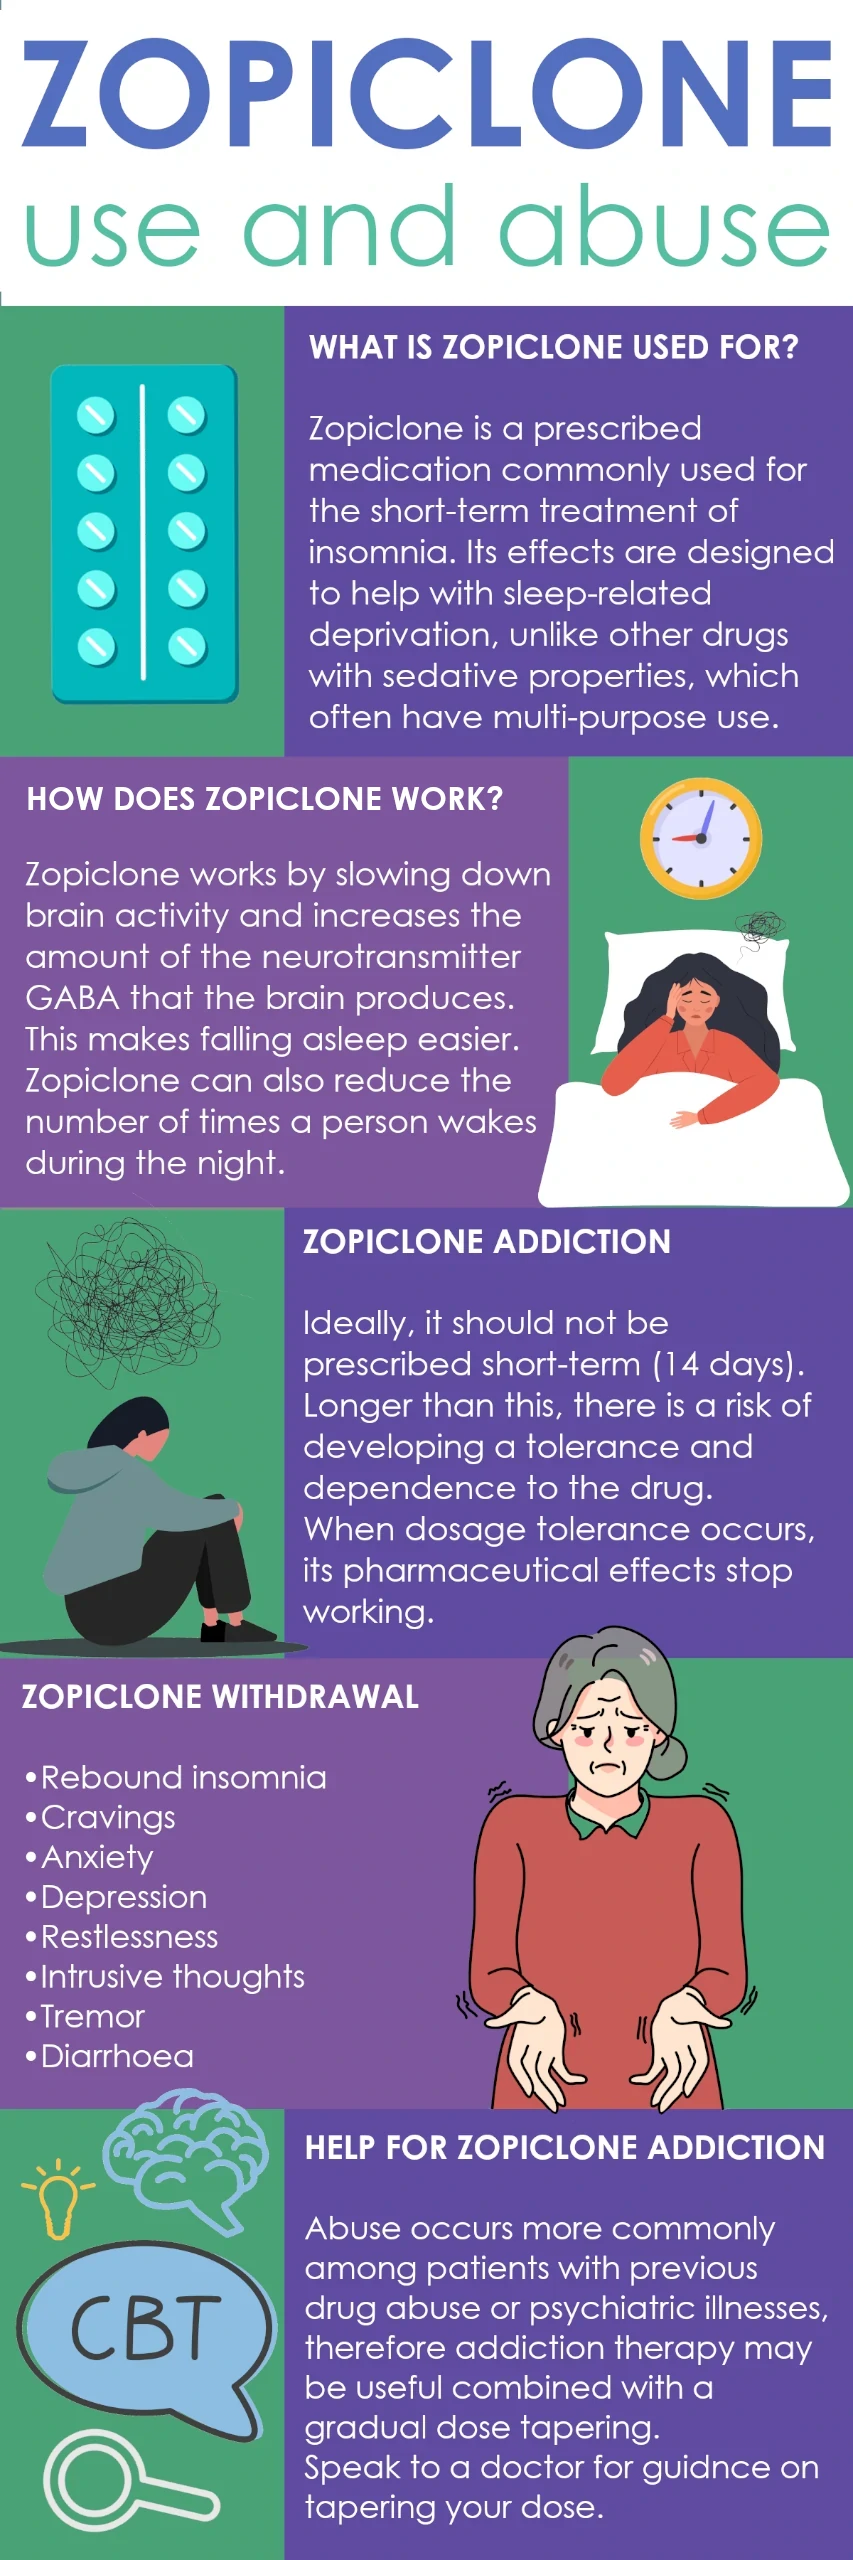 Infographic about use and abuse of Zopiclone in the UK